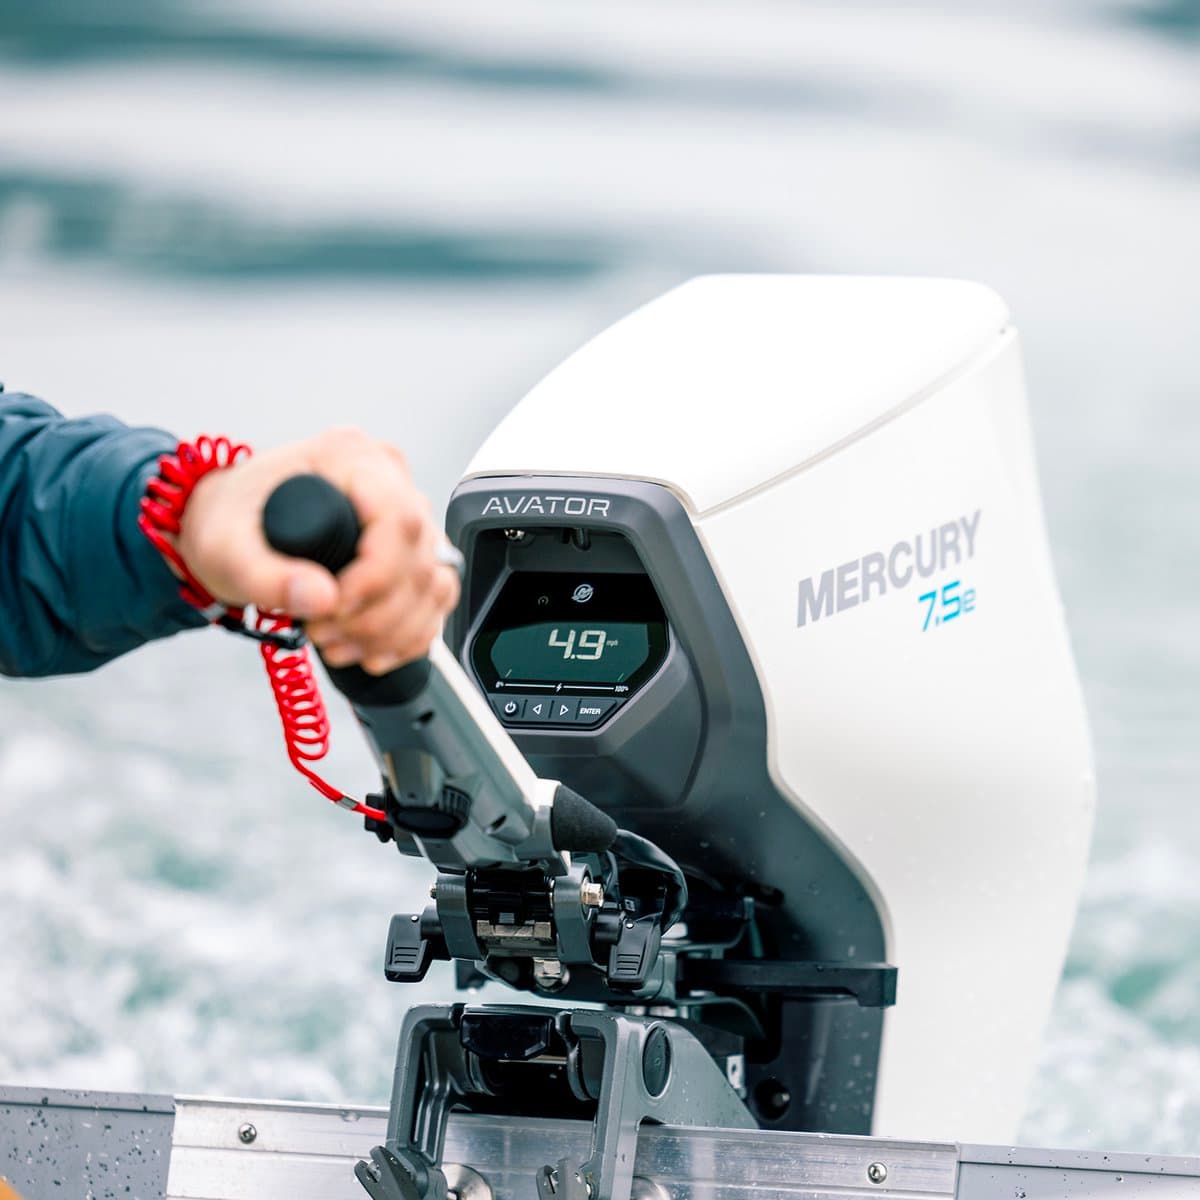 Mercury Avator 7.5e efficient electric outboard boat motor launched